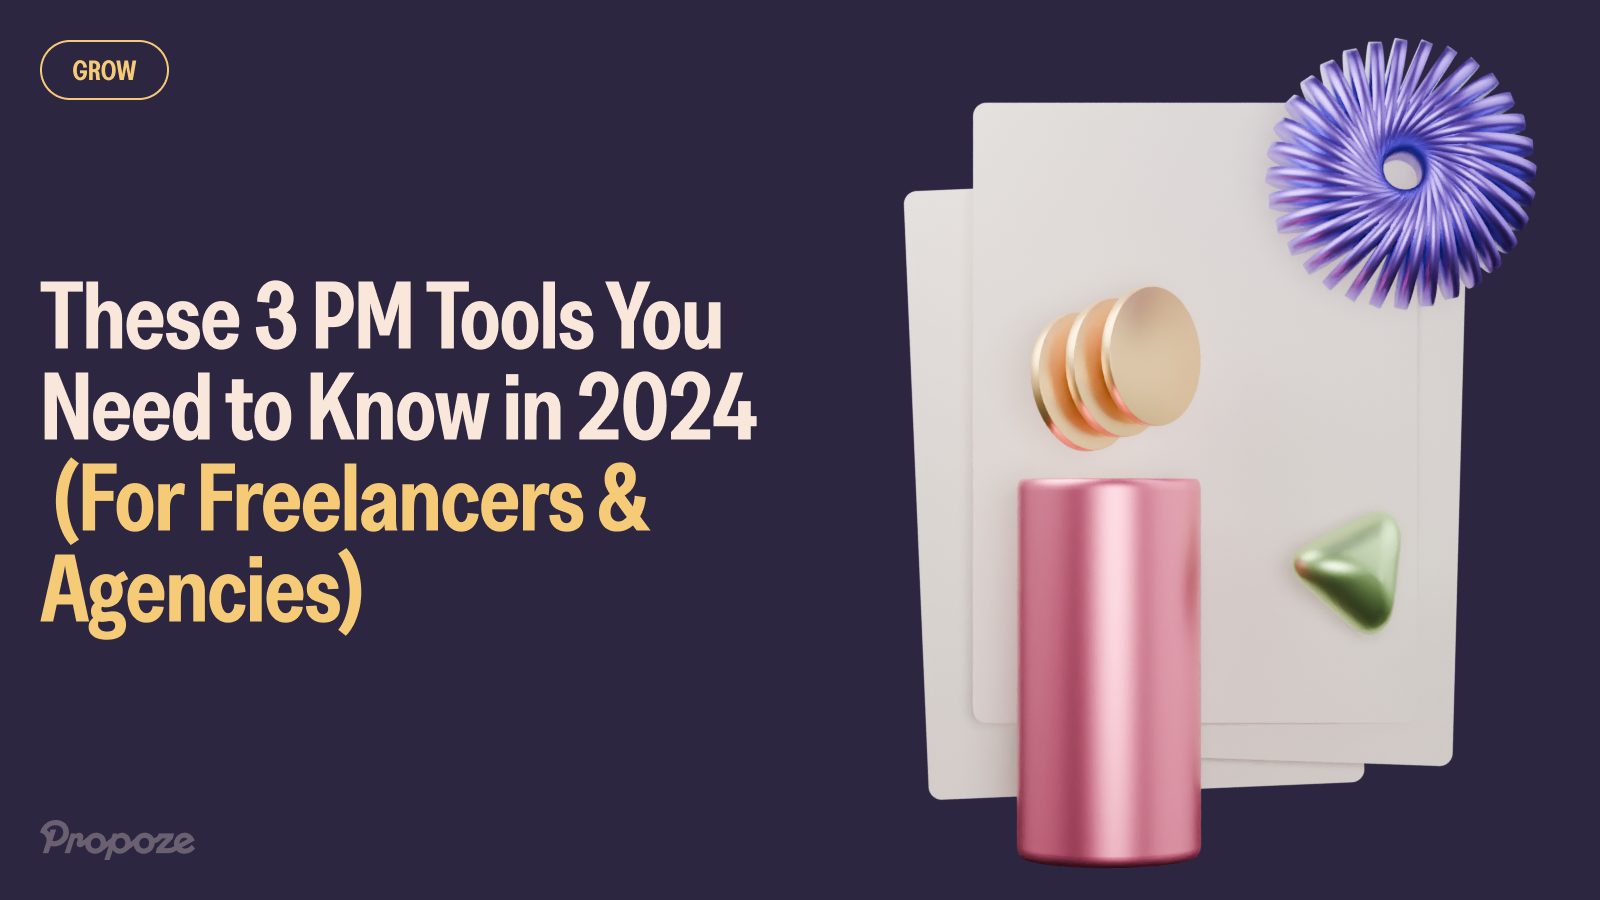 These 3 PM Tools You Need to Know in 2024 (For Freelancers & Agencies)